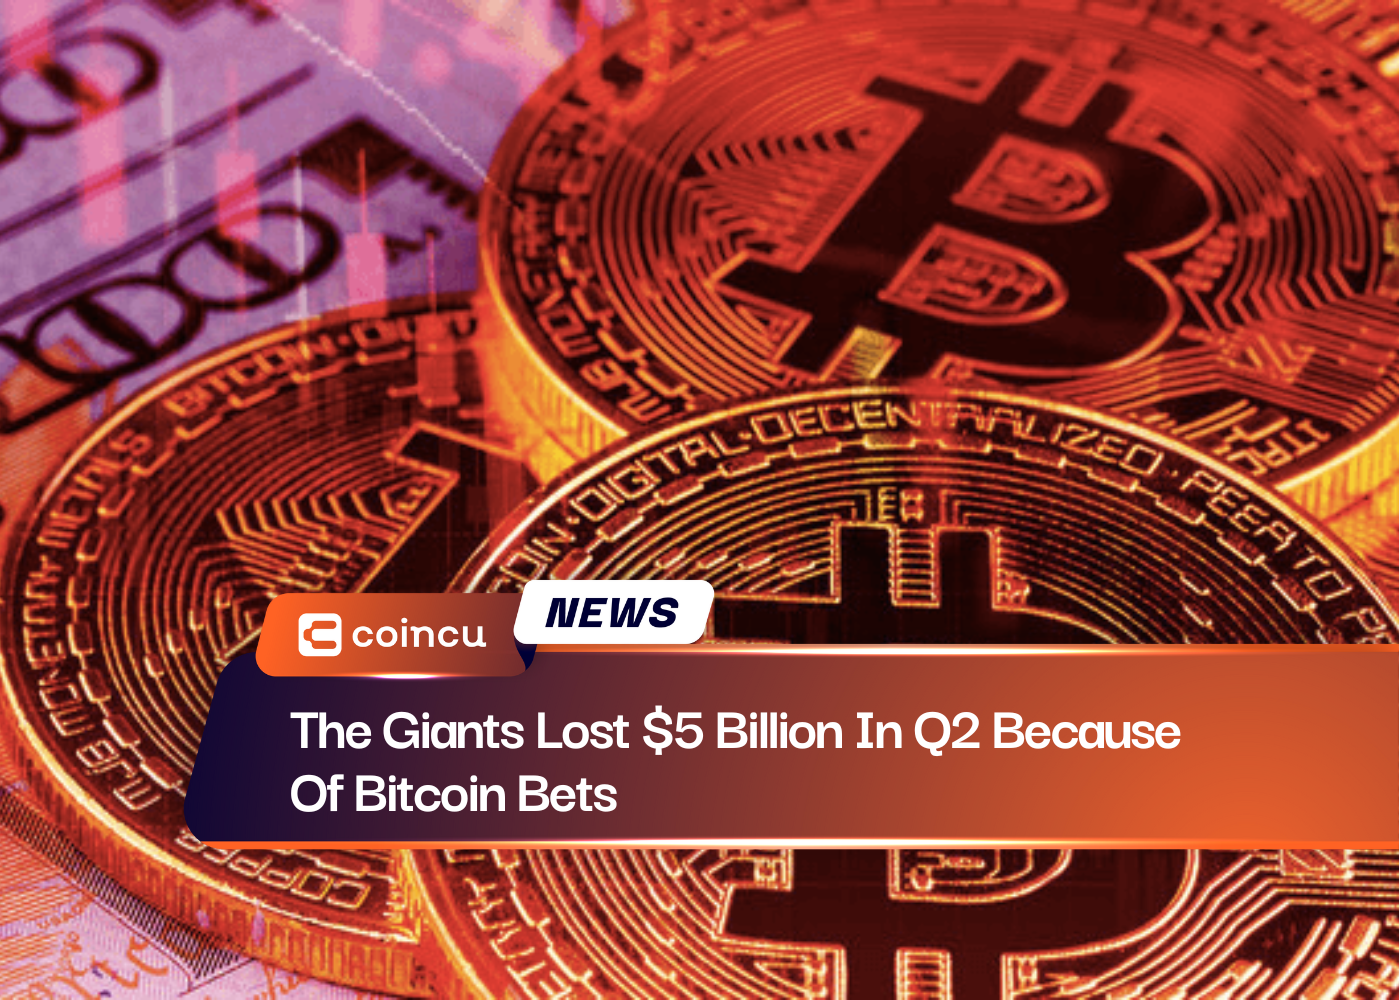 The Giants Lost $5 Billion In Q2 Because Of Bitcoin Bets